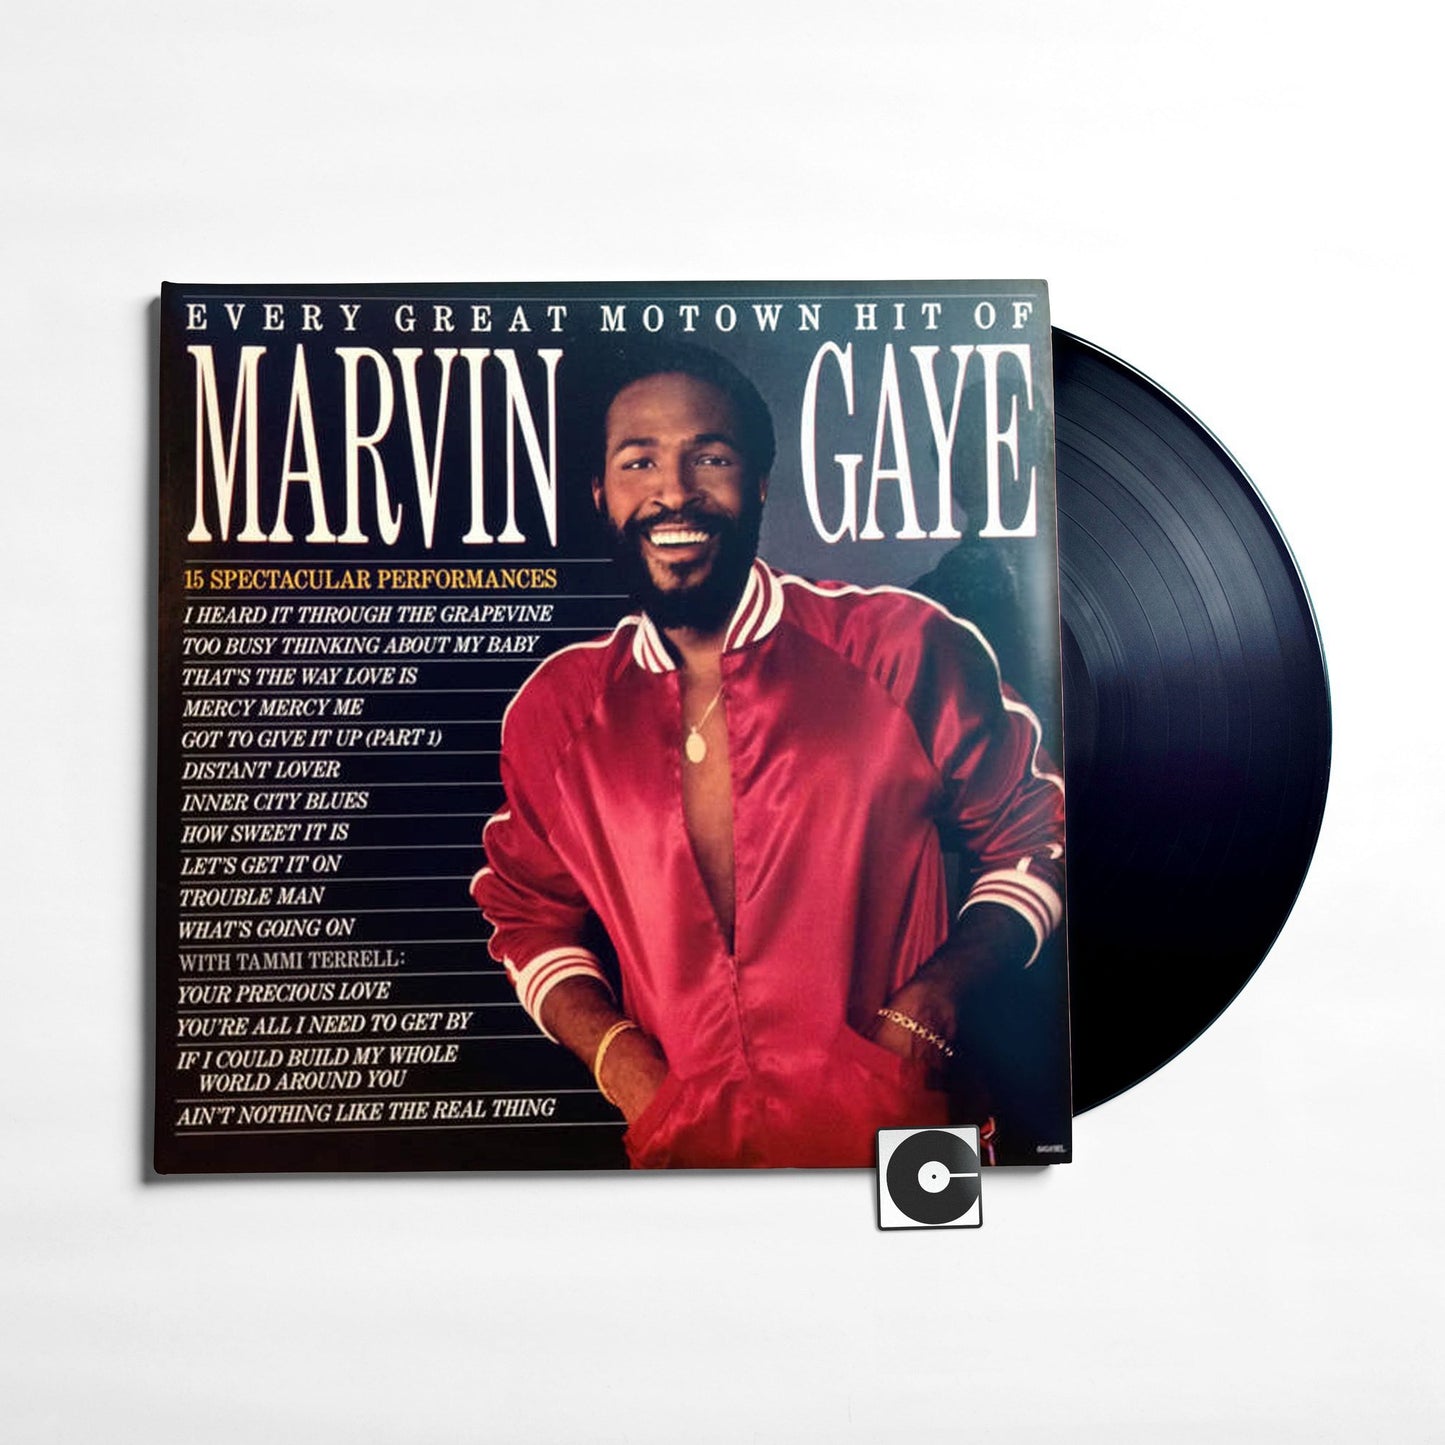 Marvin Gaye - "Every Great Motown Hit Of Marvin Gaye"